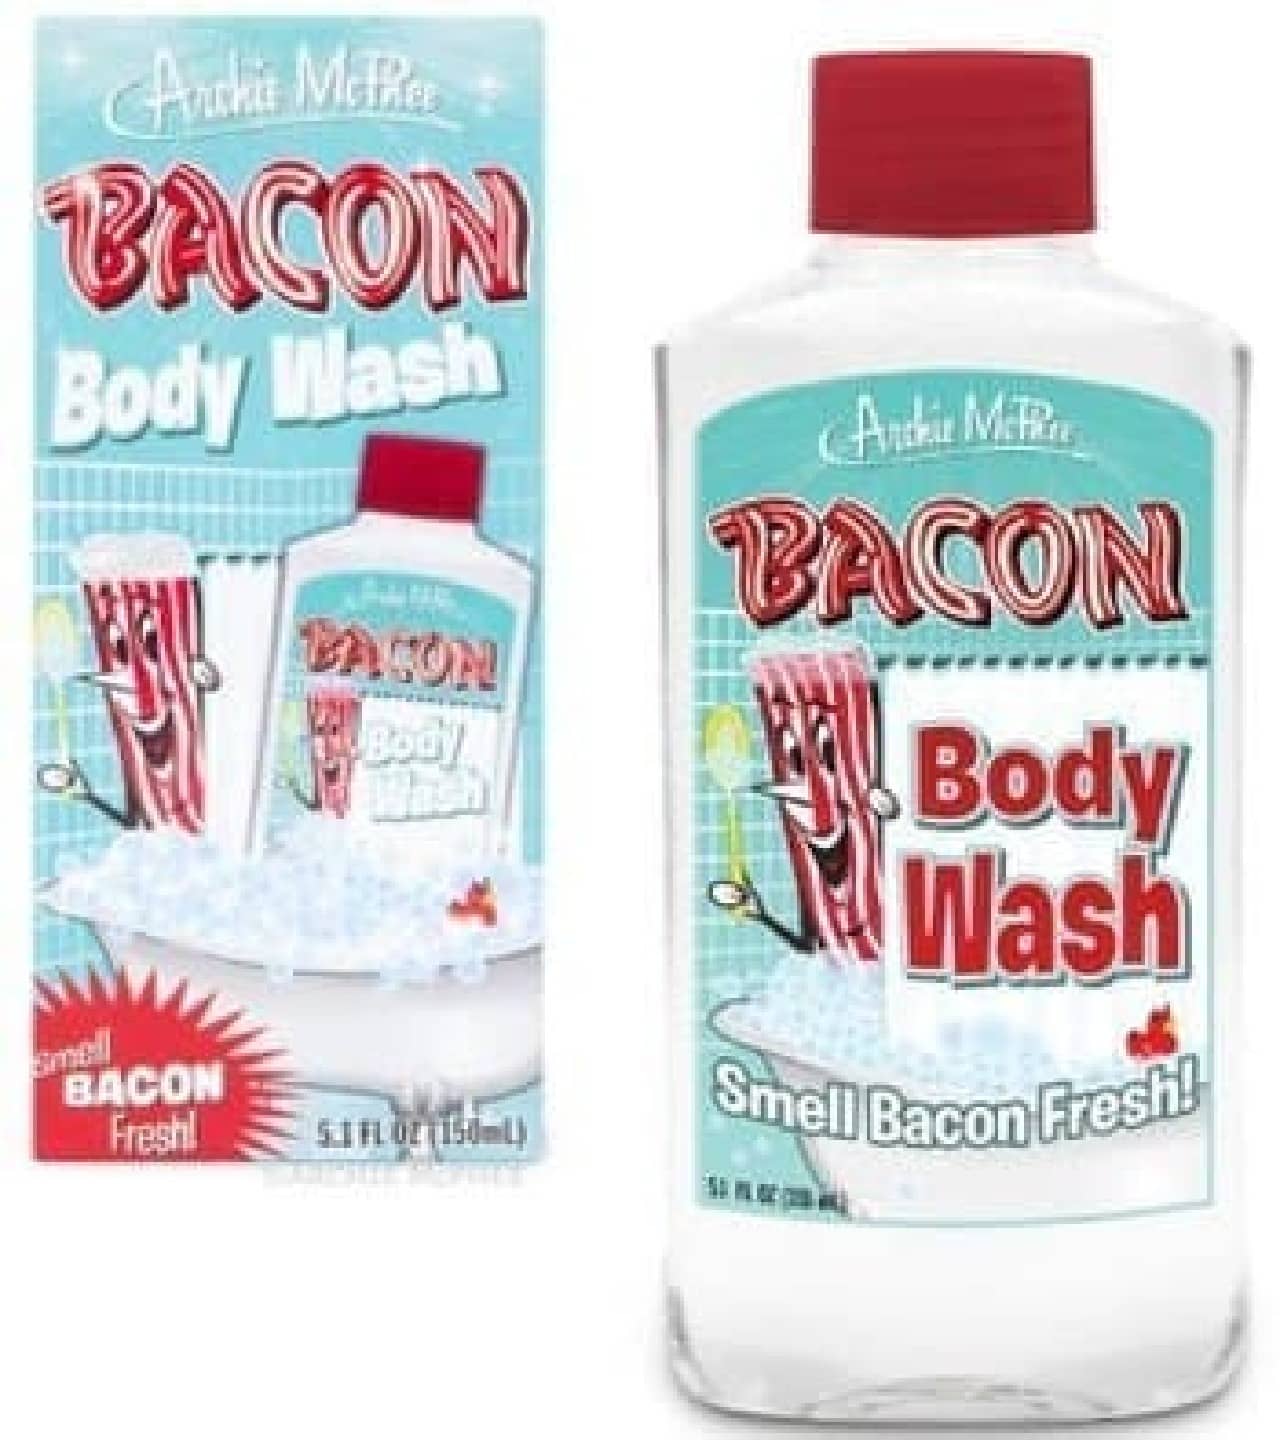 After taking a bath, your body may also give off the scent of bacon